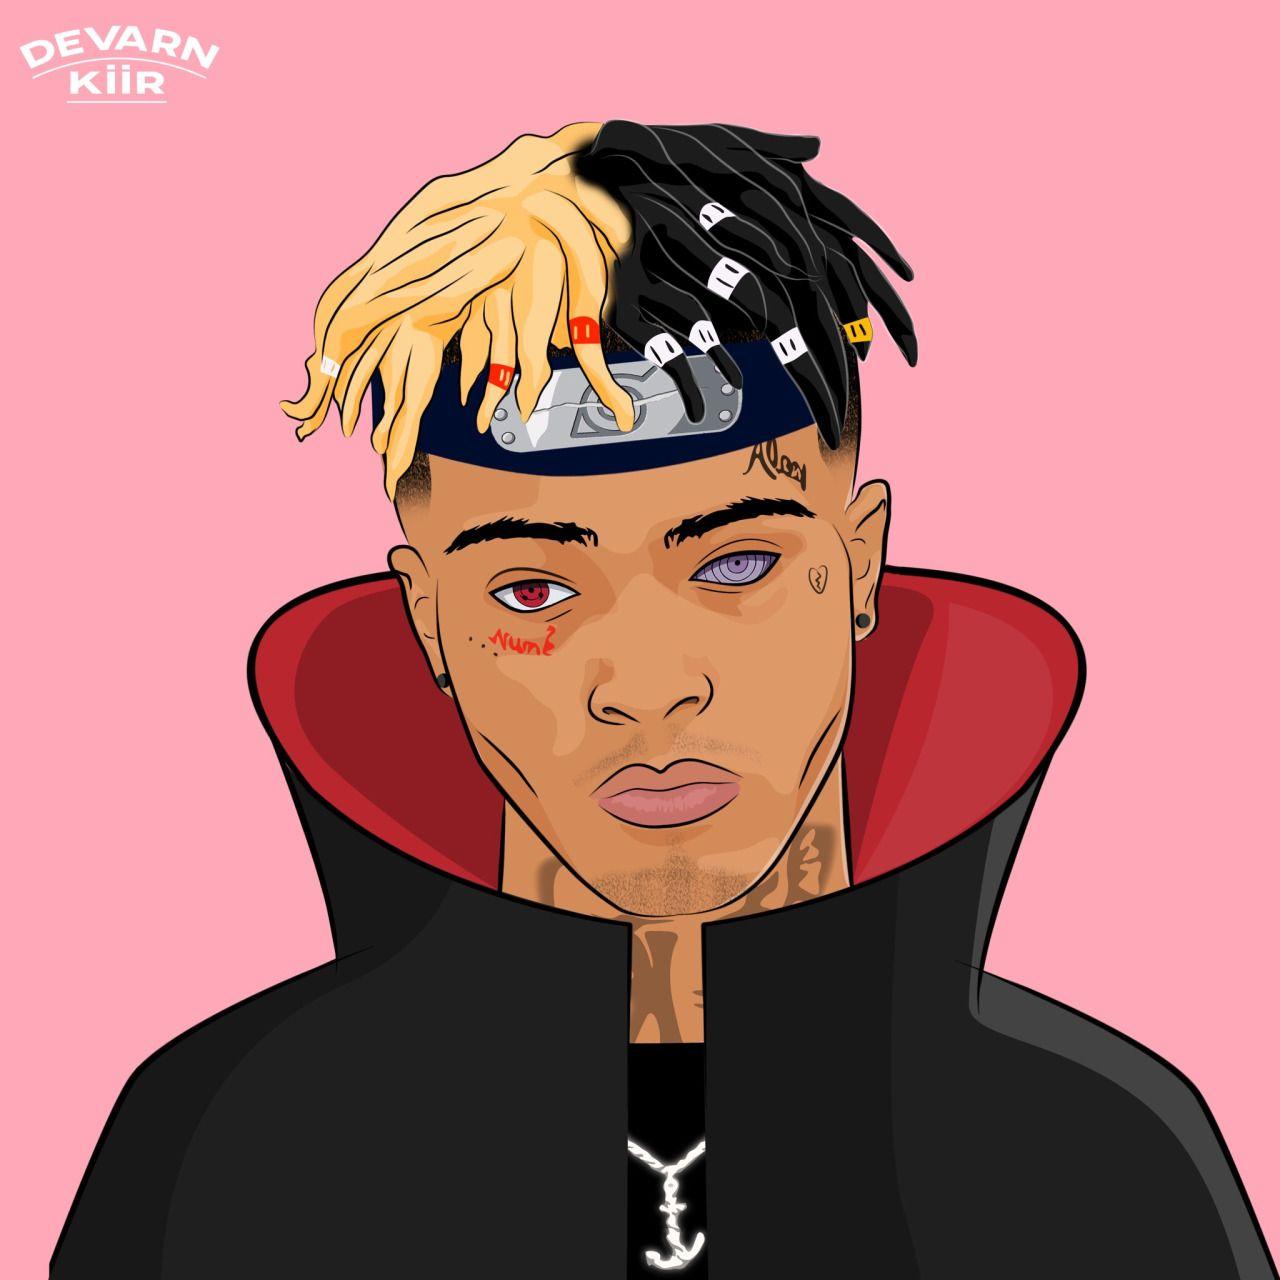 XXXTENTACION hes an other favorite artist hes very different